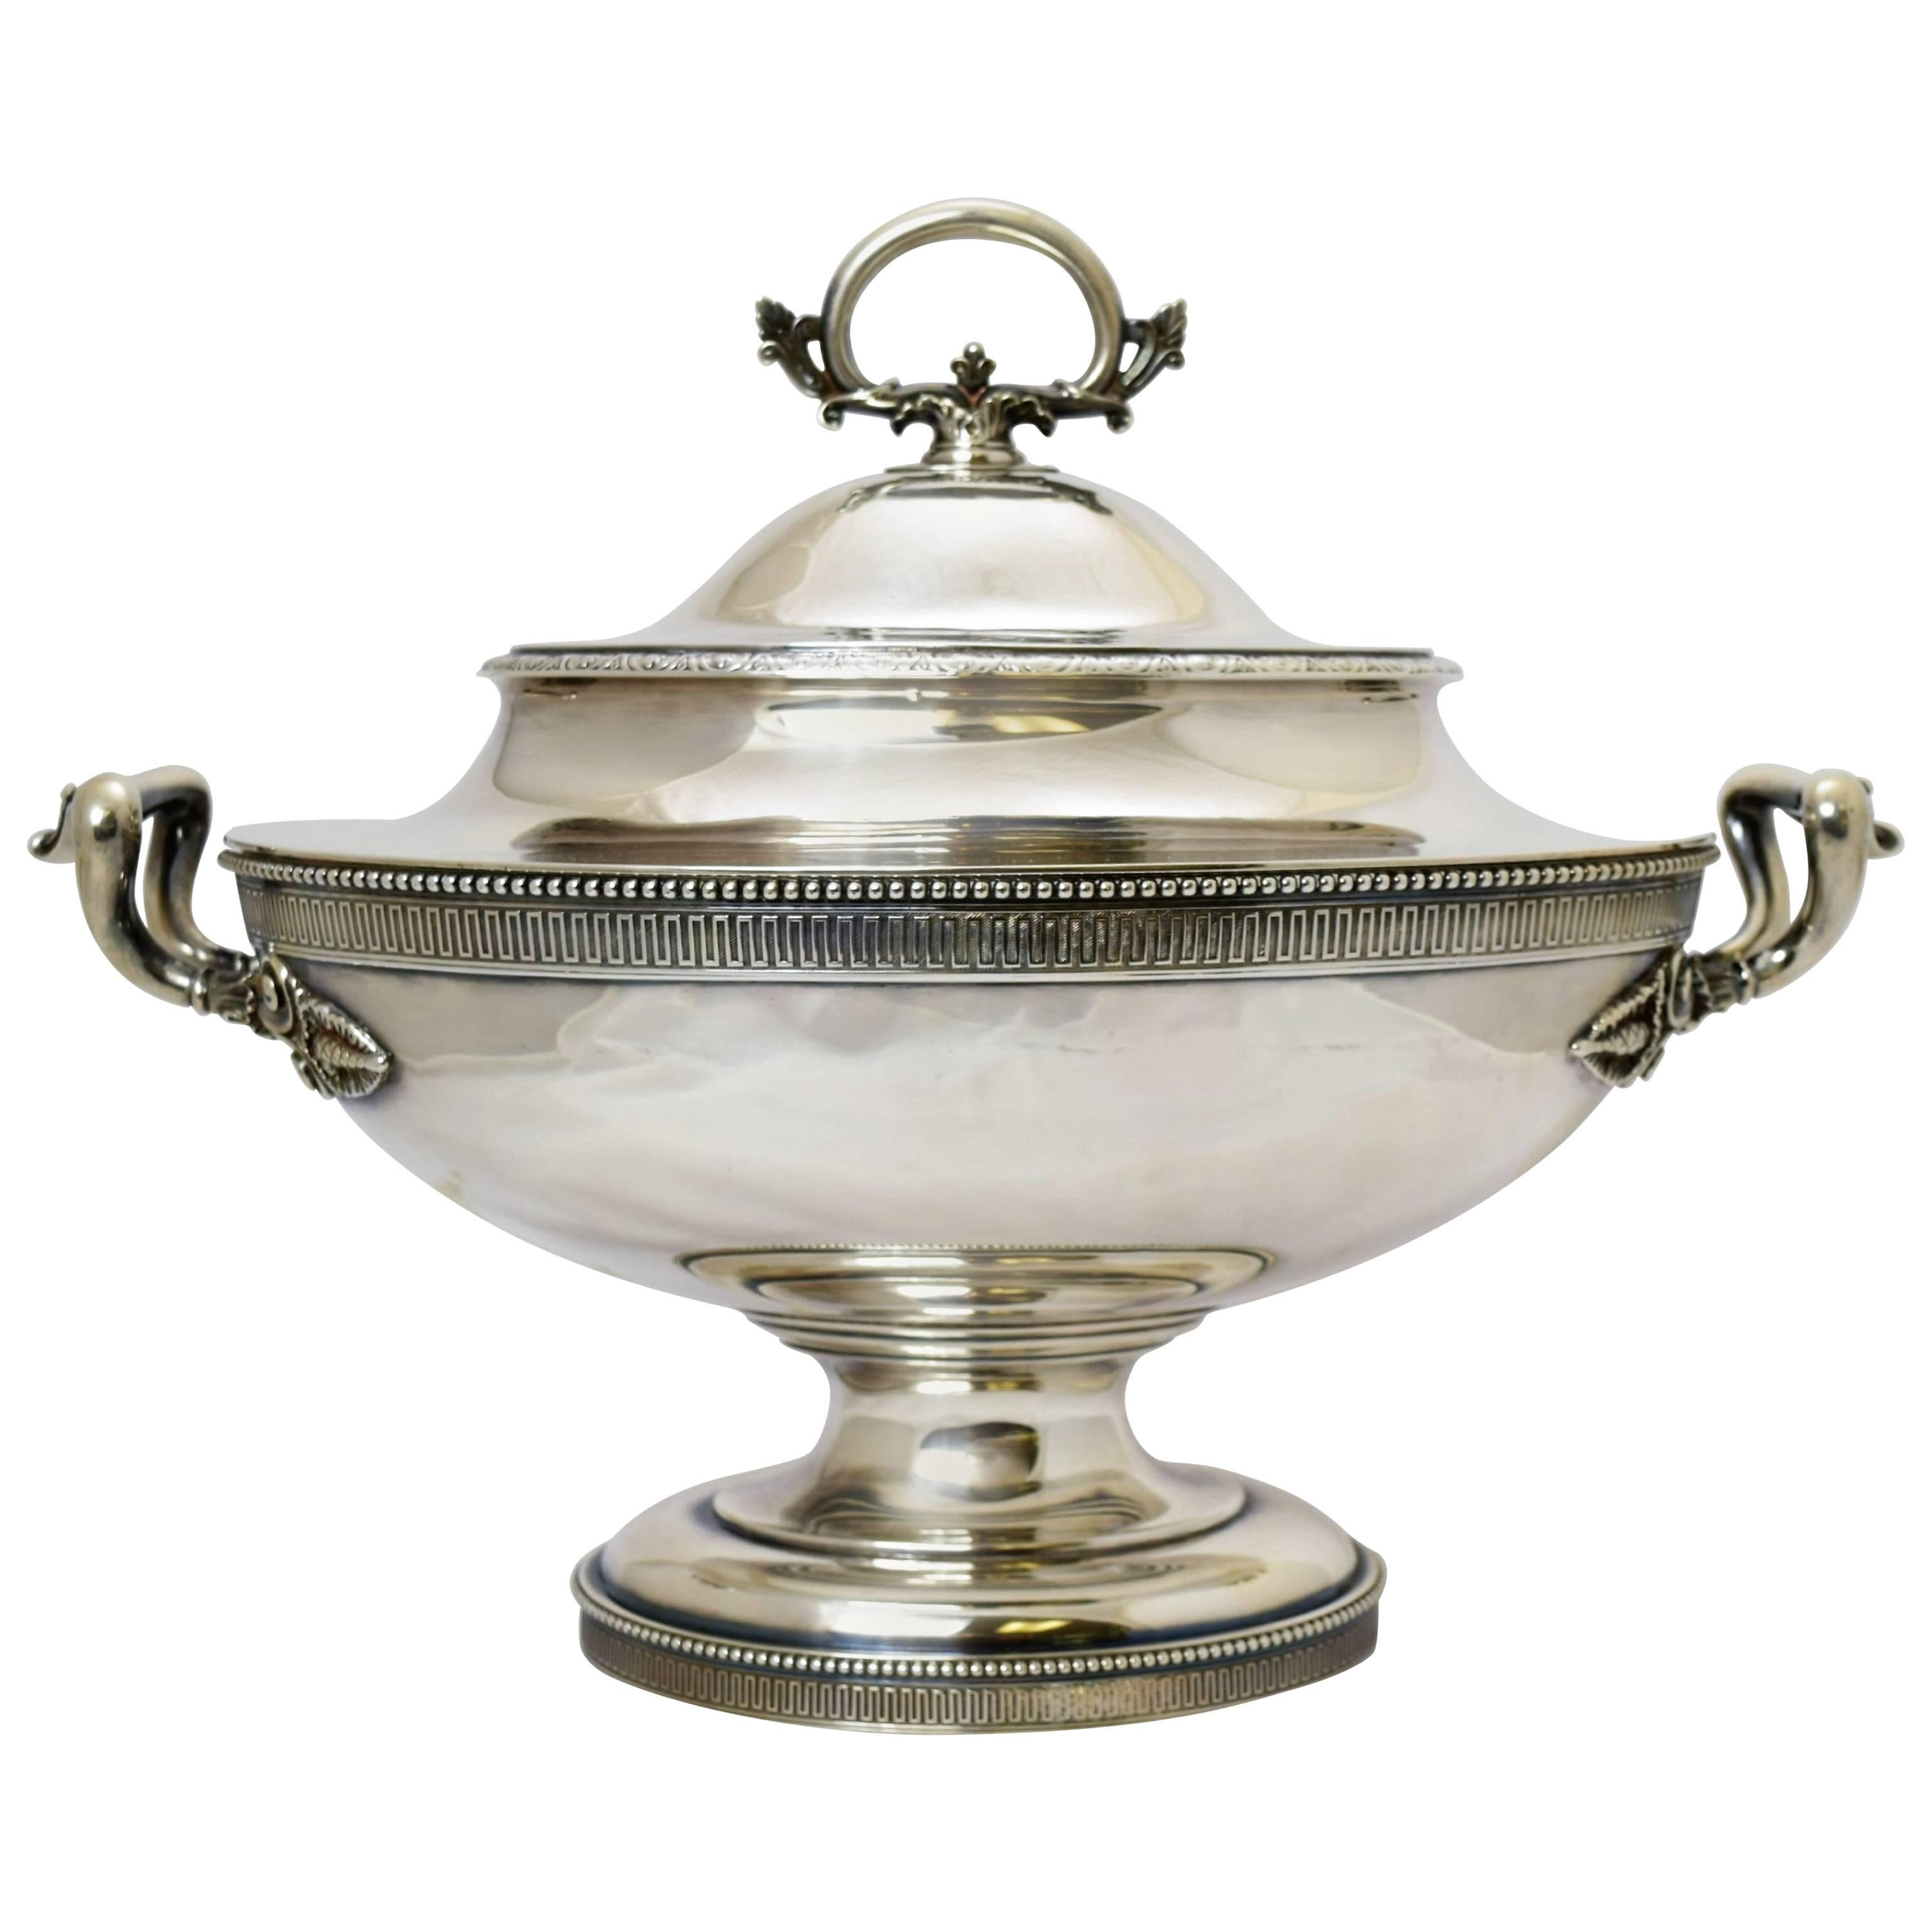 Tiffany & Co. Large Sterling Silver Tureen, circa 1875